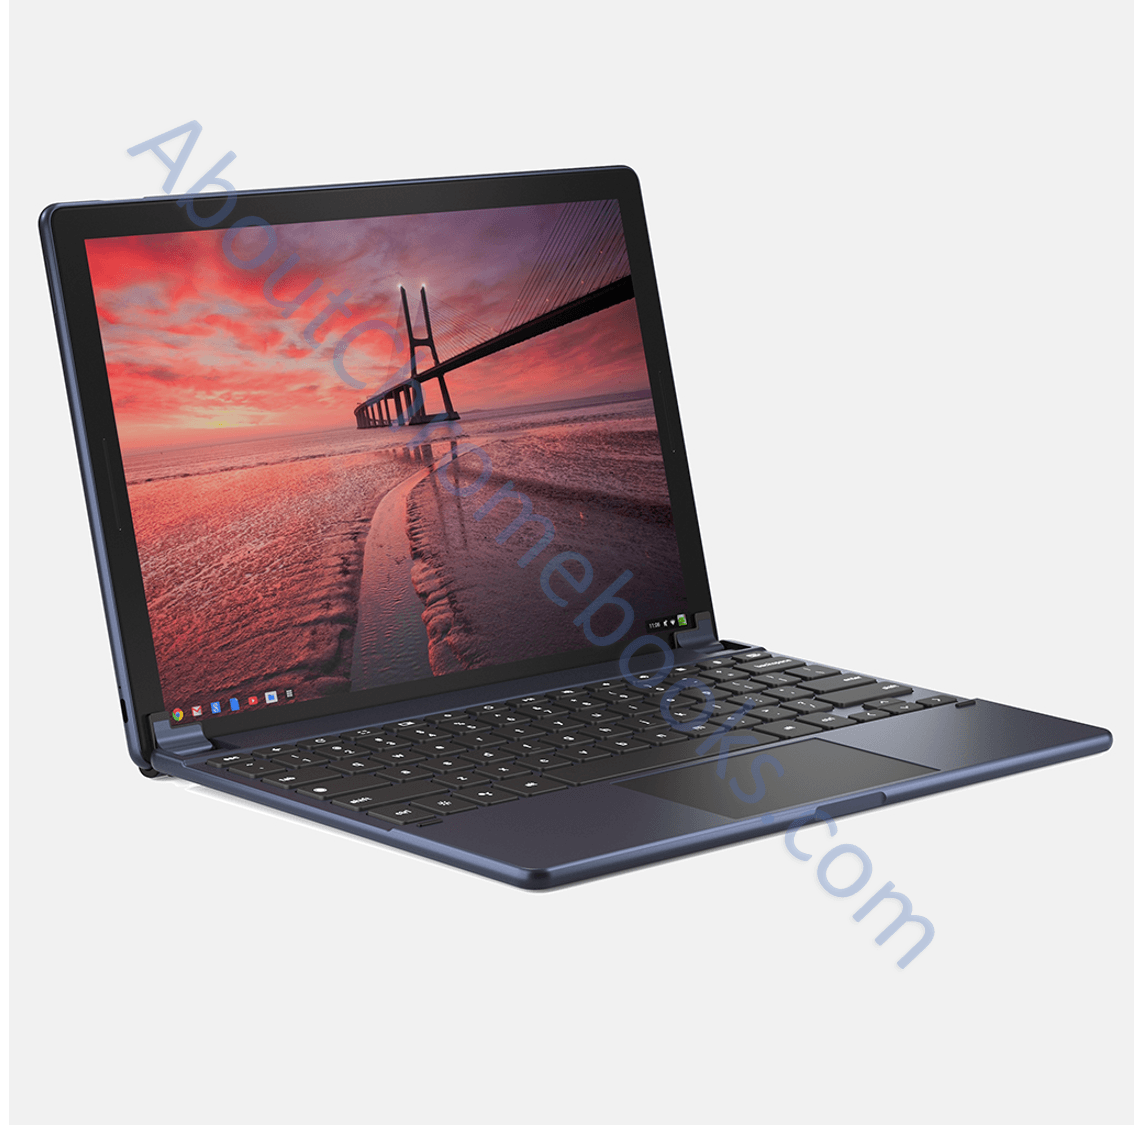 Will the Pixel Slate, aka: Nocturne, dual boot into Windows 10 or Linux?